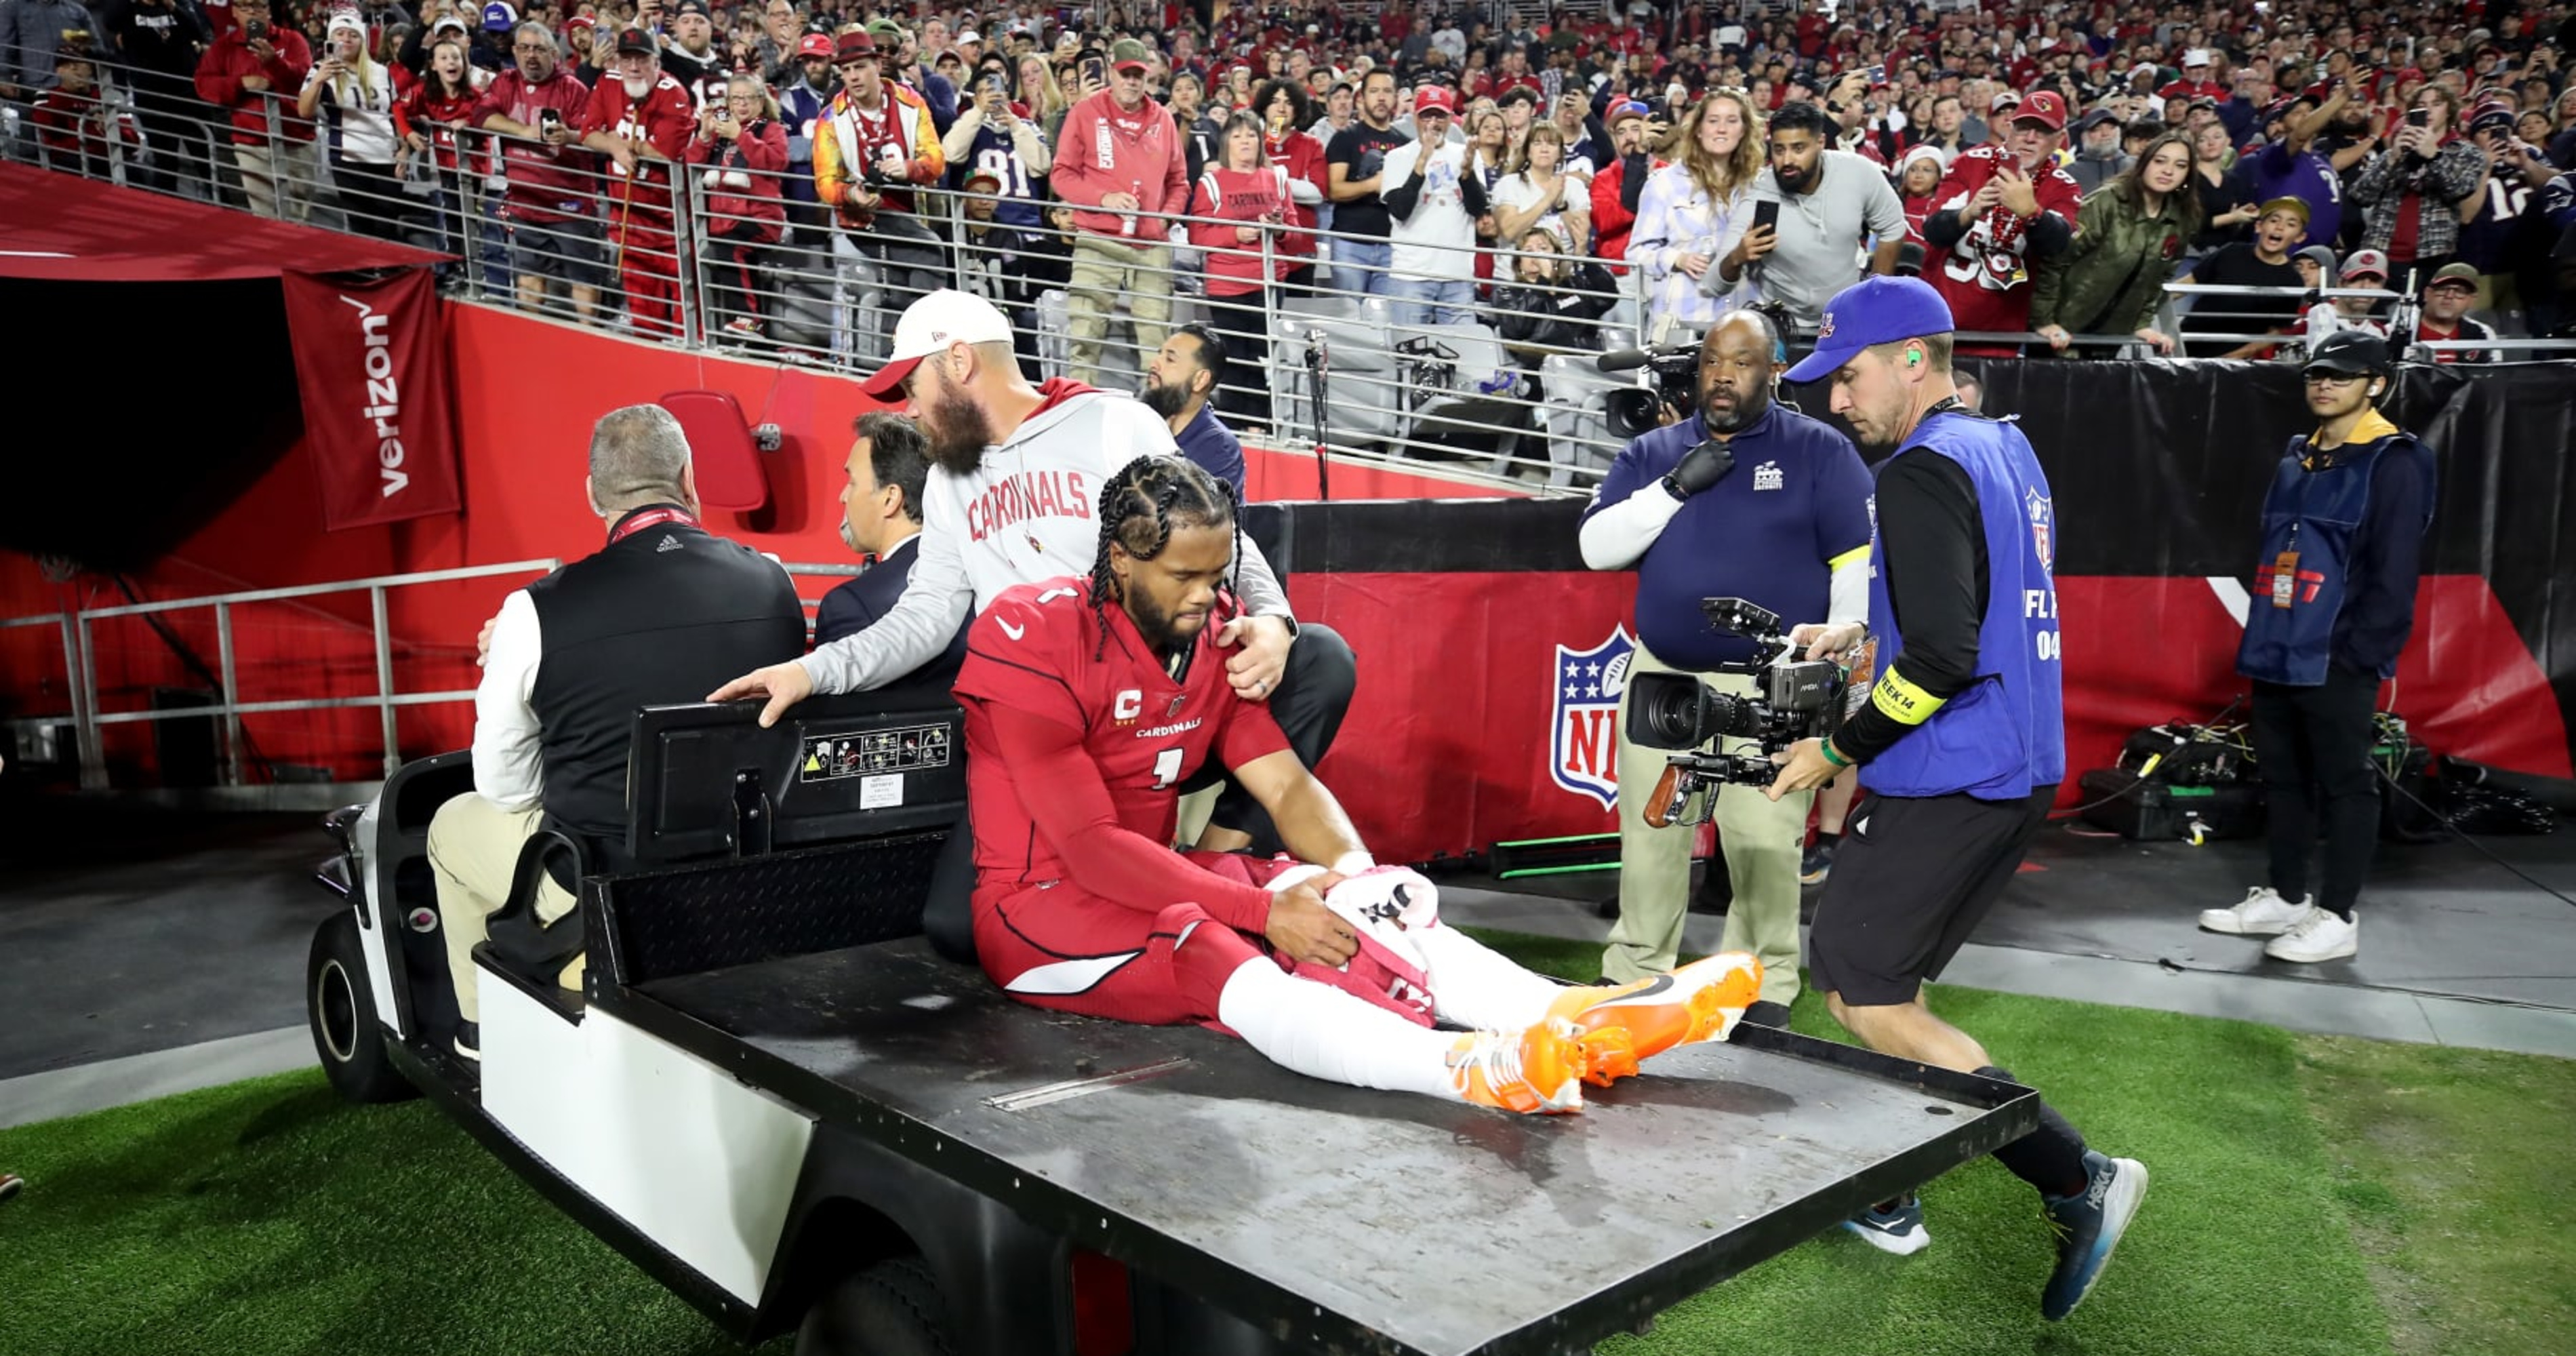 Report: Cardinals' Kyler Murray to Miss Rest of Season With Torn ACL Injury